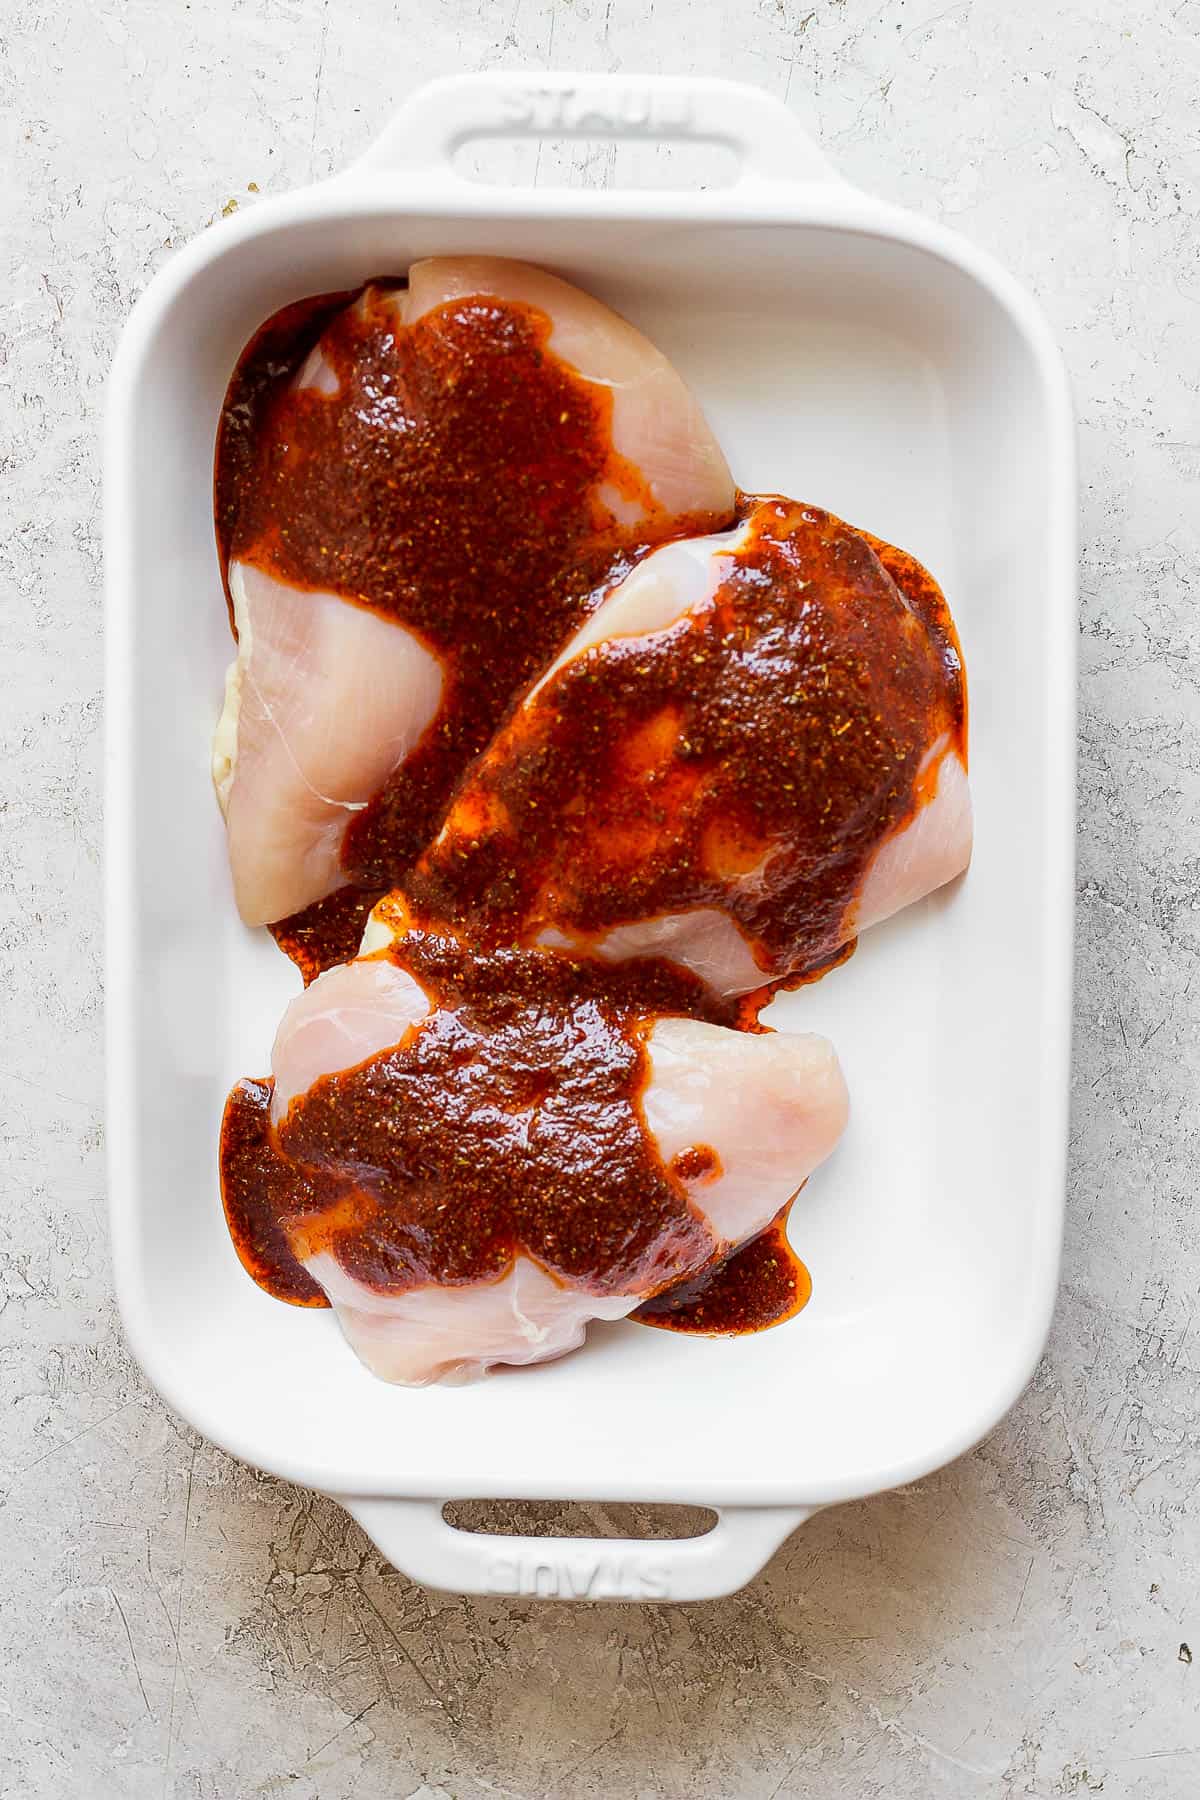 The marinade poured over whole chicken breasts in a white baking dish.